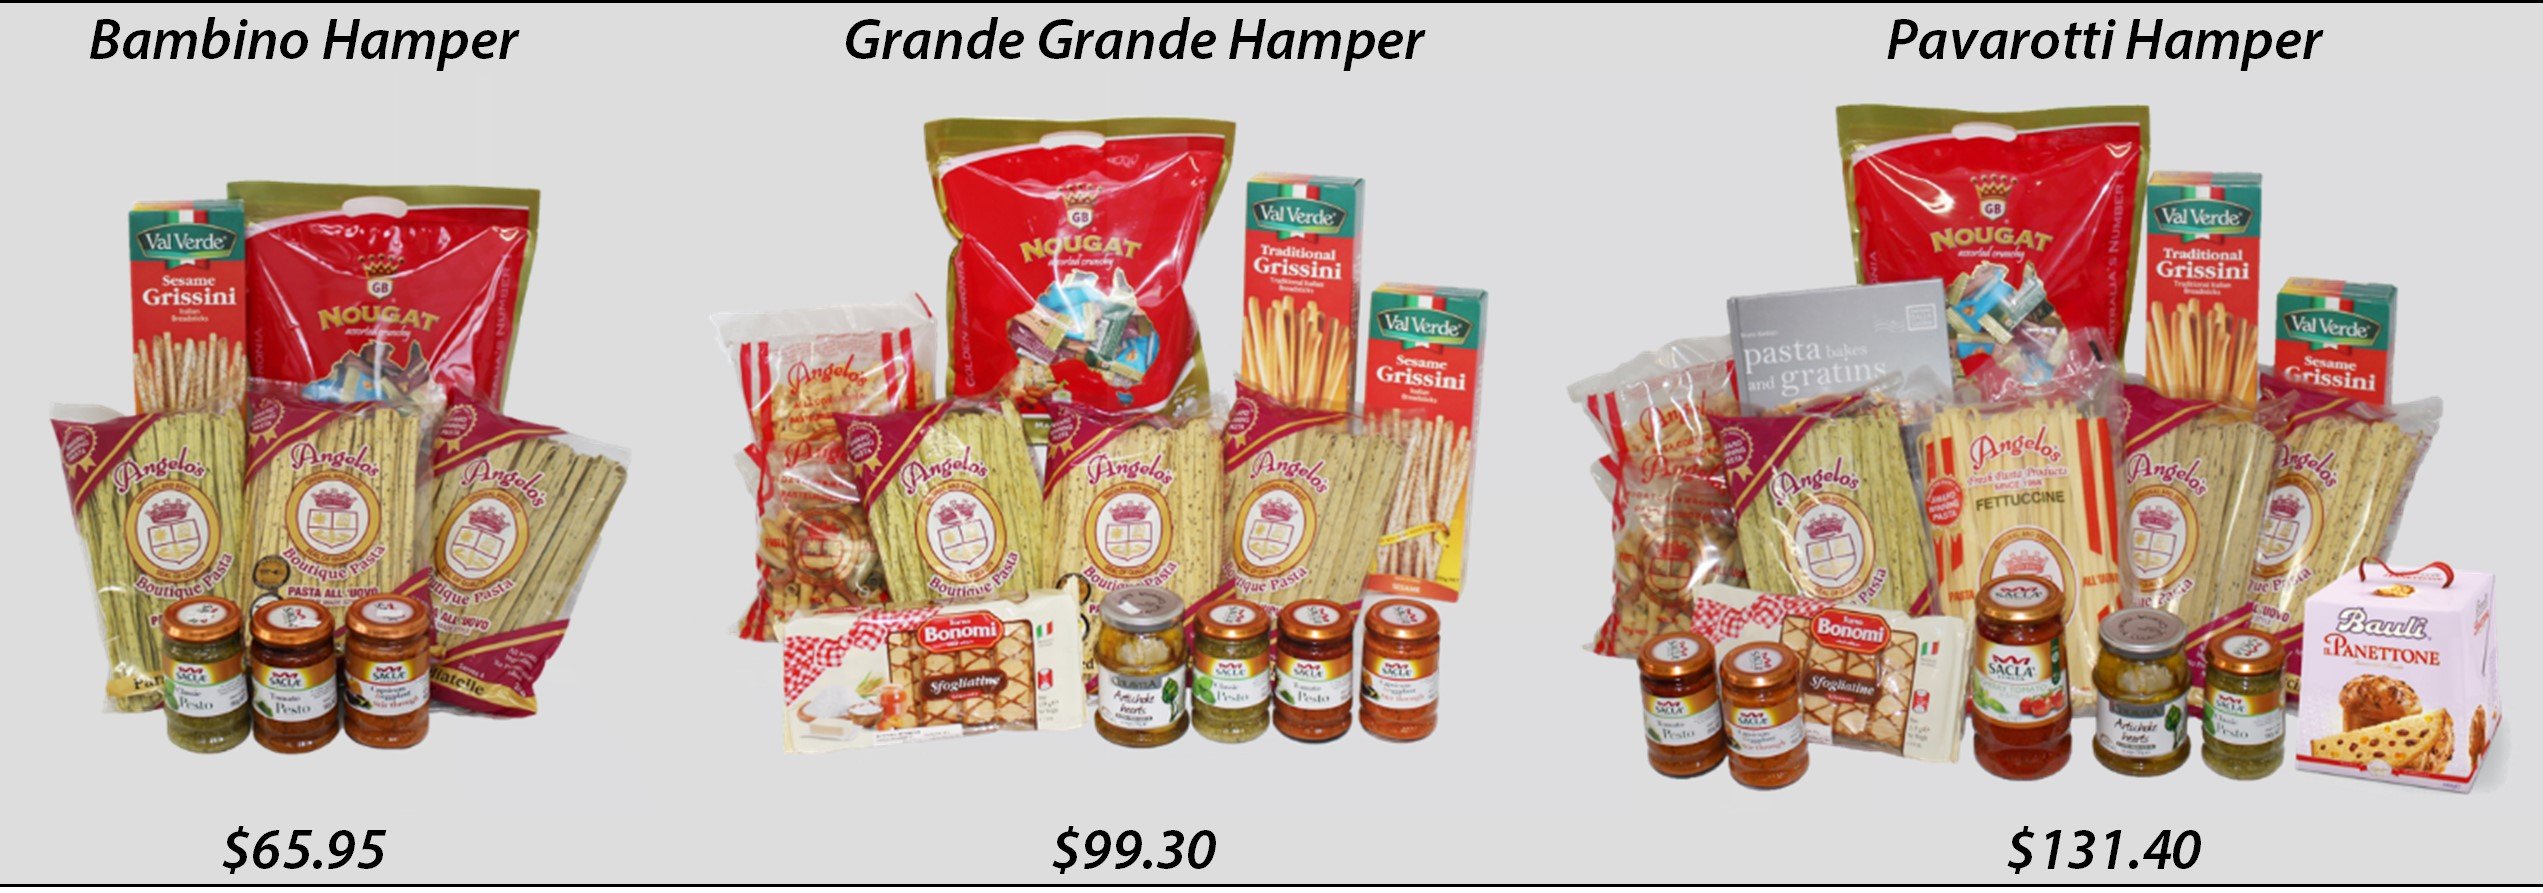 Christmas Hampers With Prices